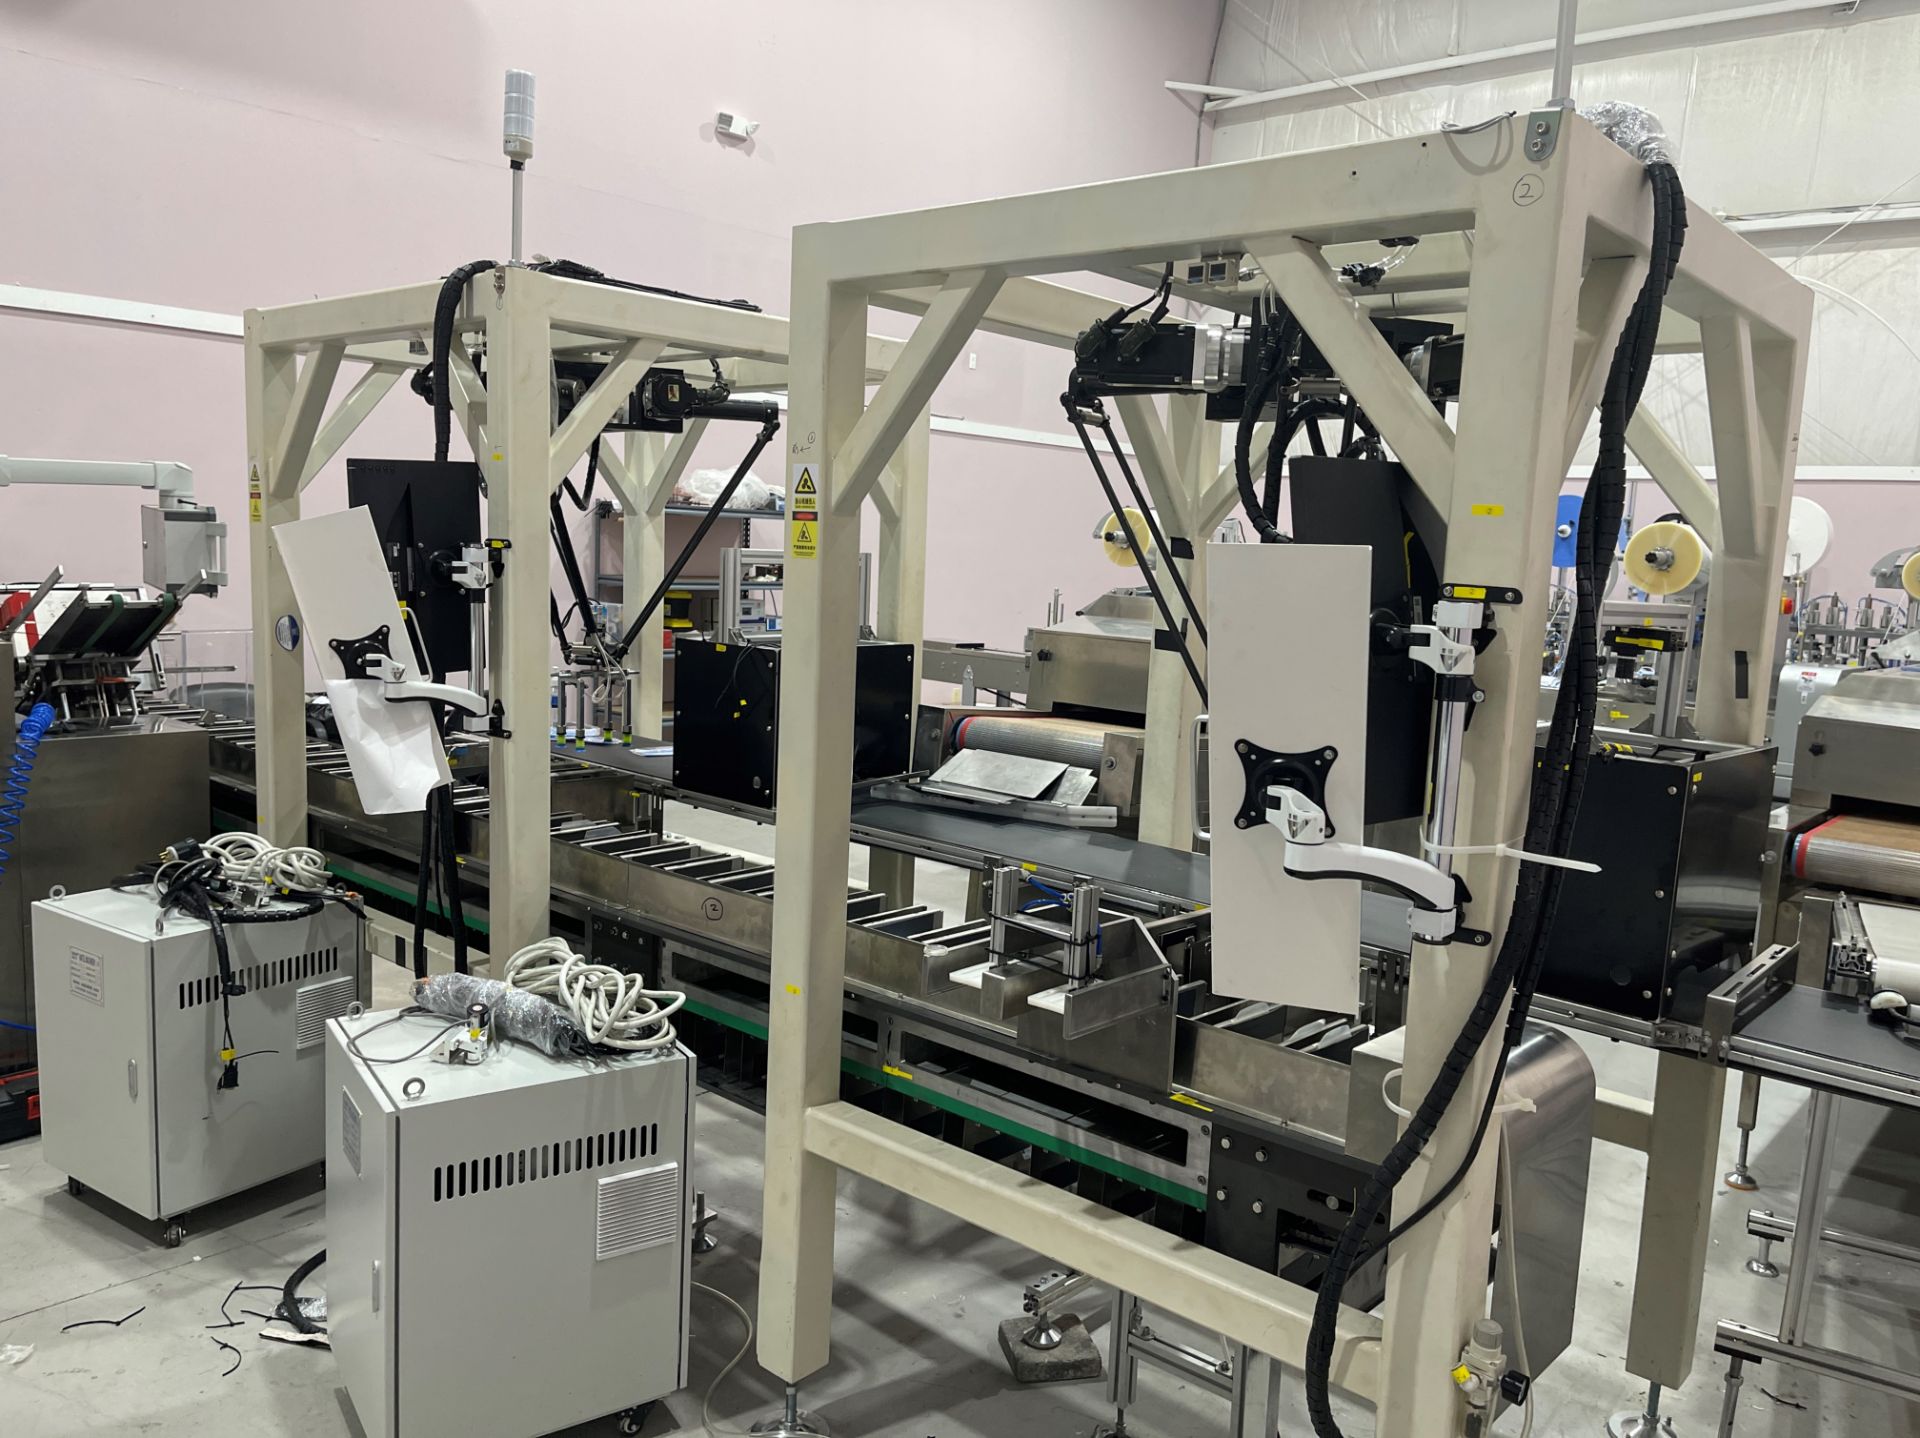 COMPLETE PACKAGE: 2020 3-Ply Disposable Medical Mask Assembly & Packaging Line Equipment, Includes: - Image 41 of 150